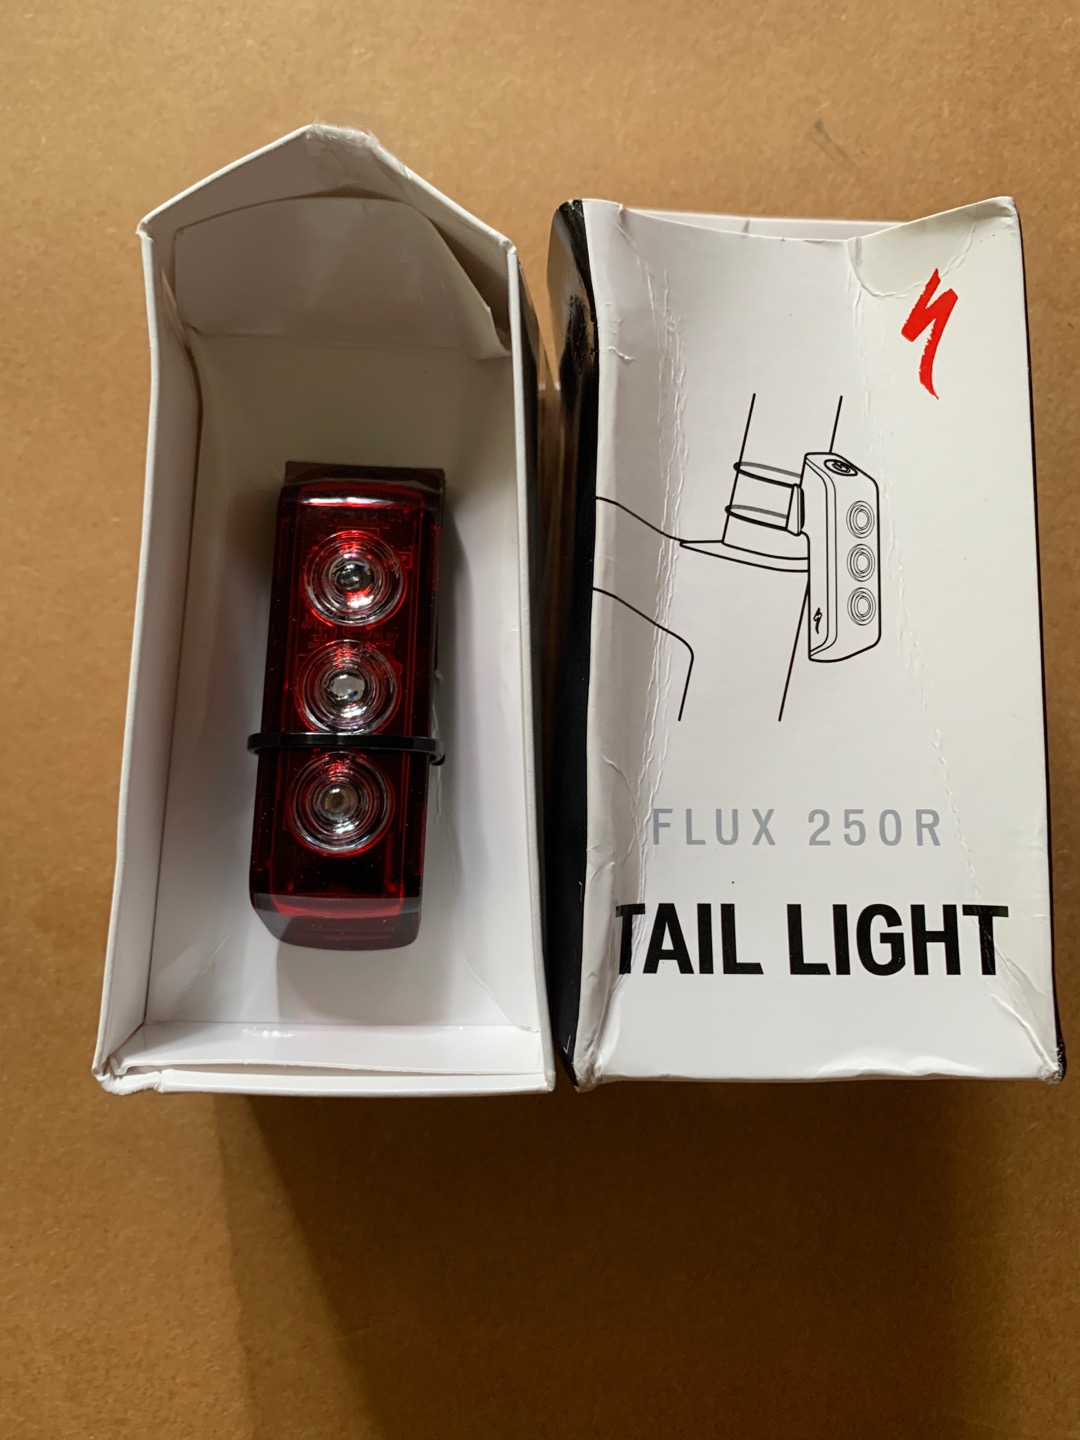 specialized flux 250r taillight